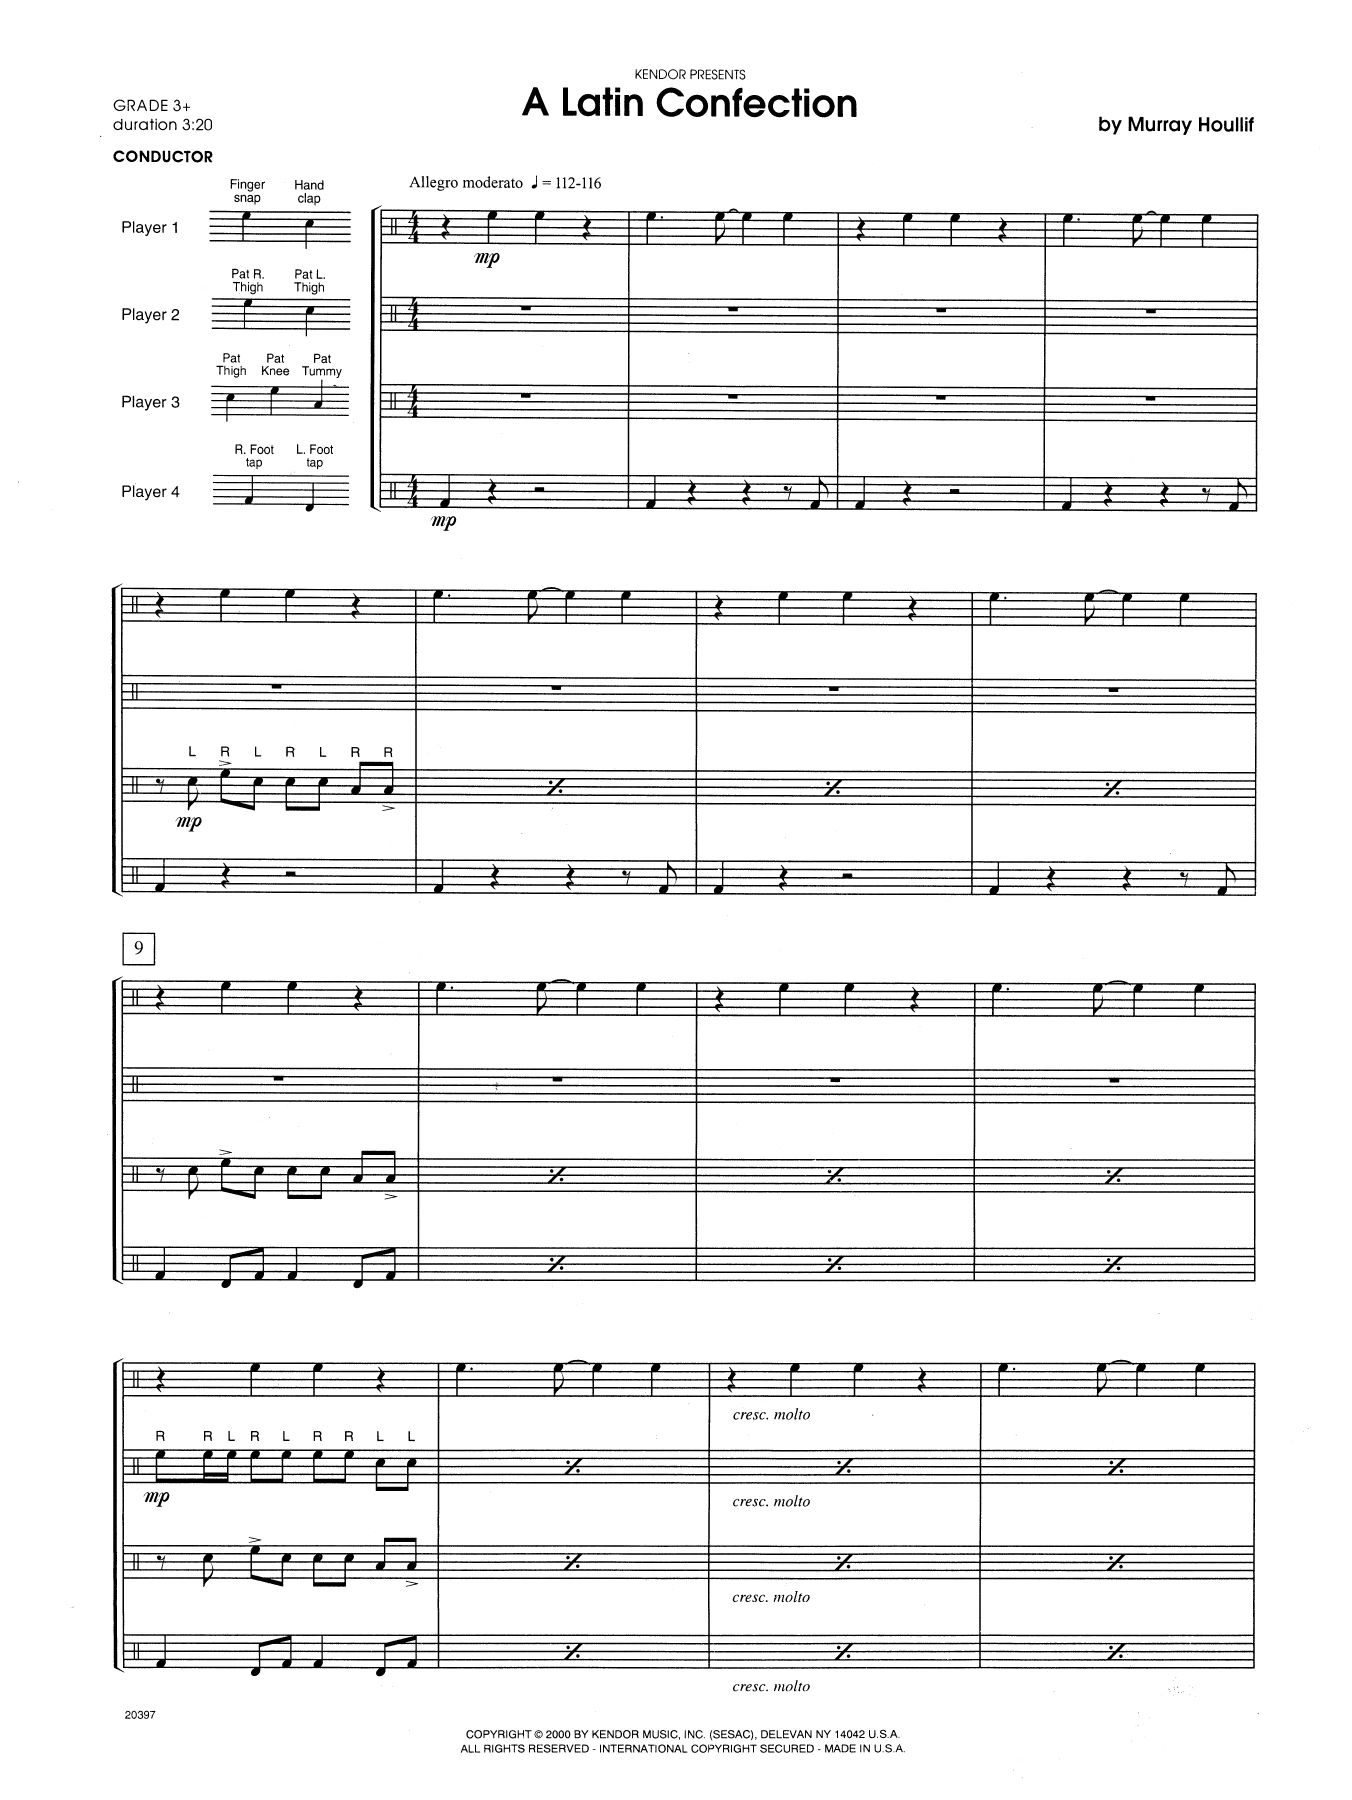 Download Murray Houllif A Latin Confection - Full Score Sheet Music